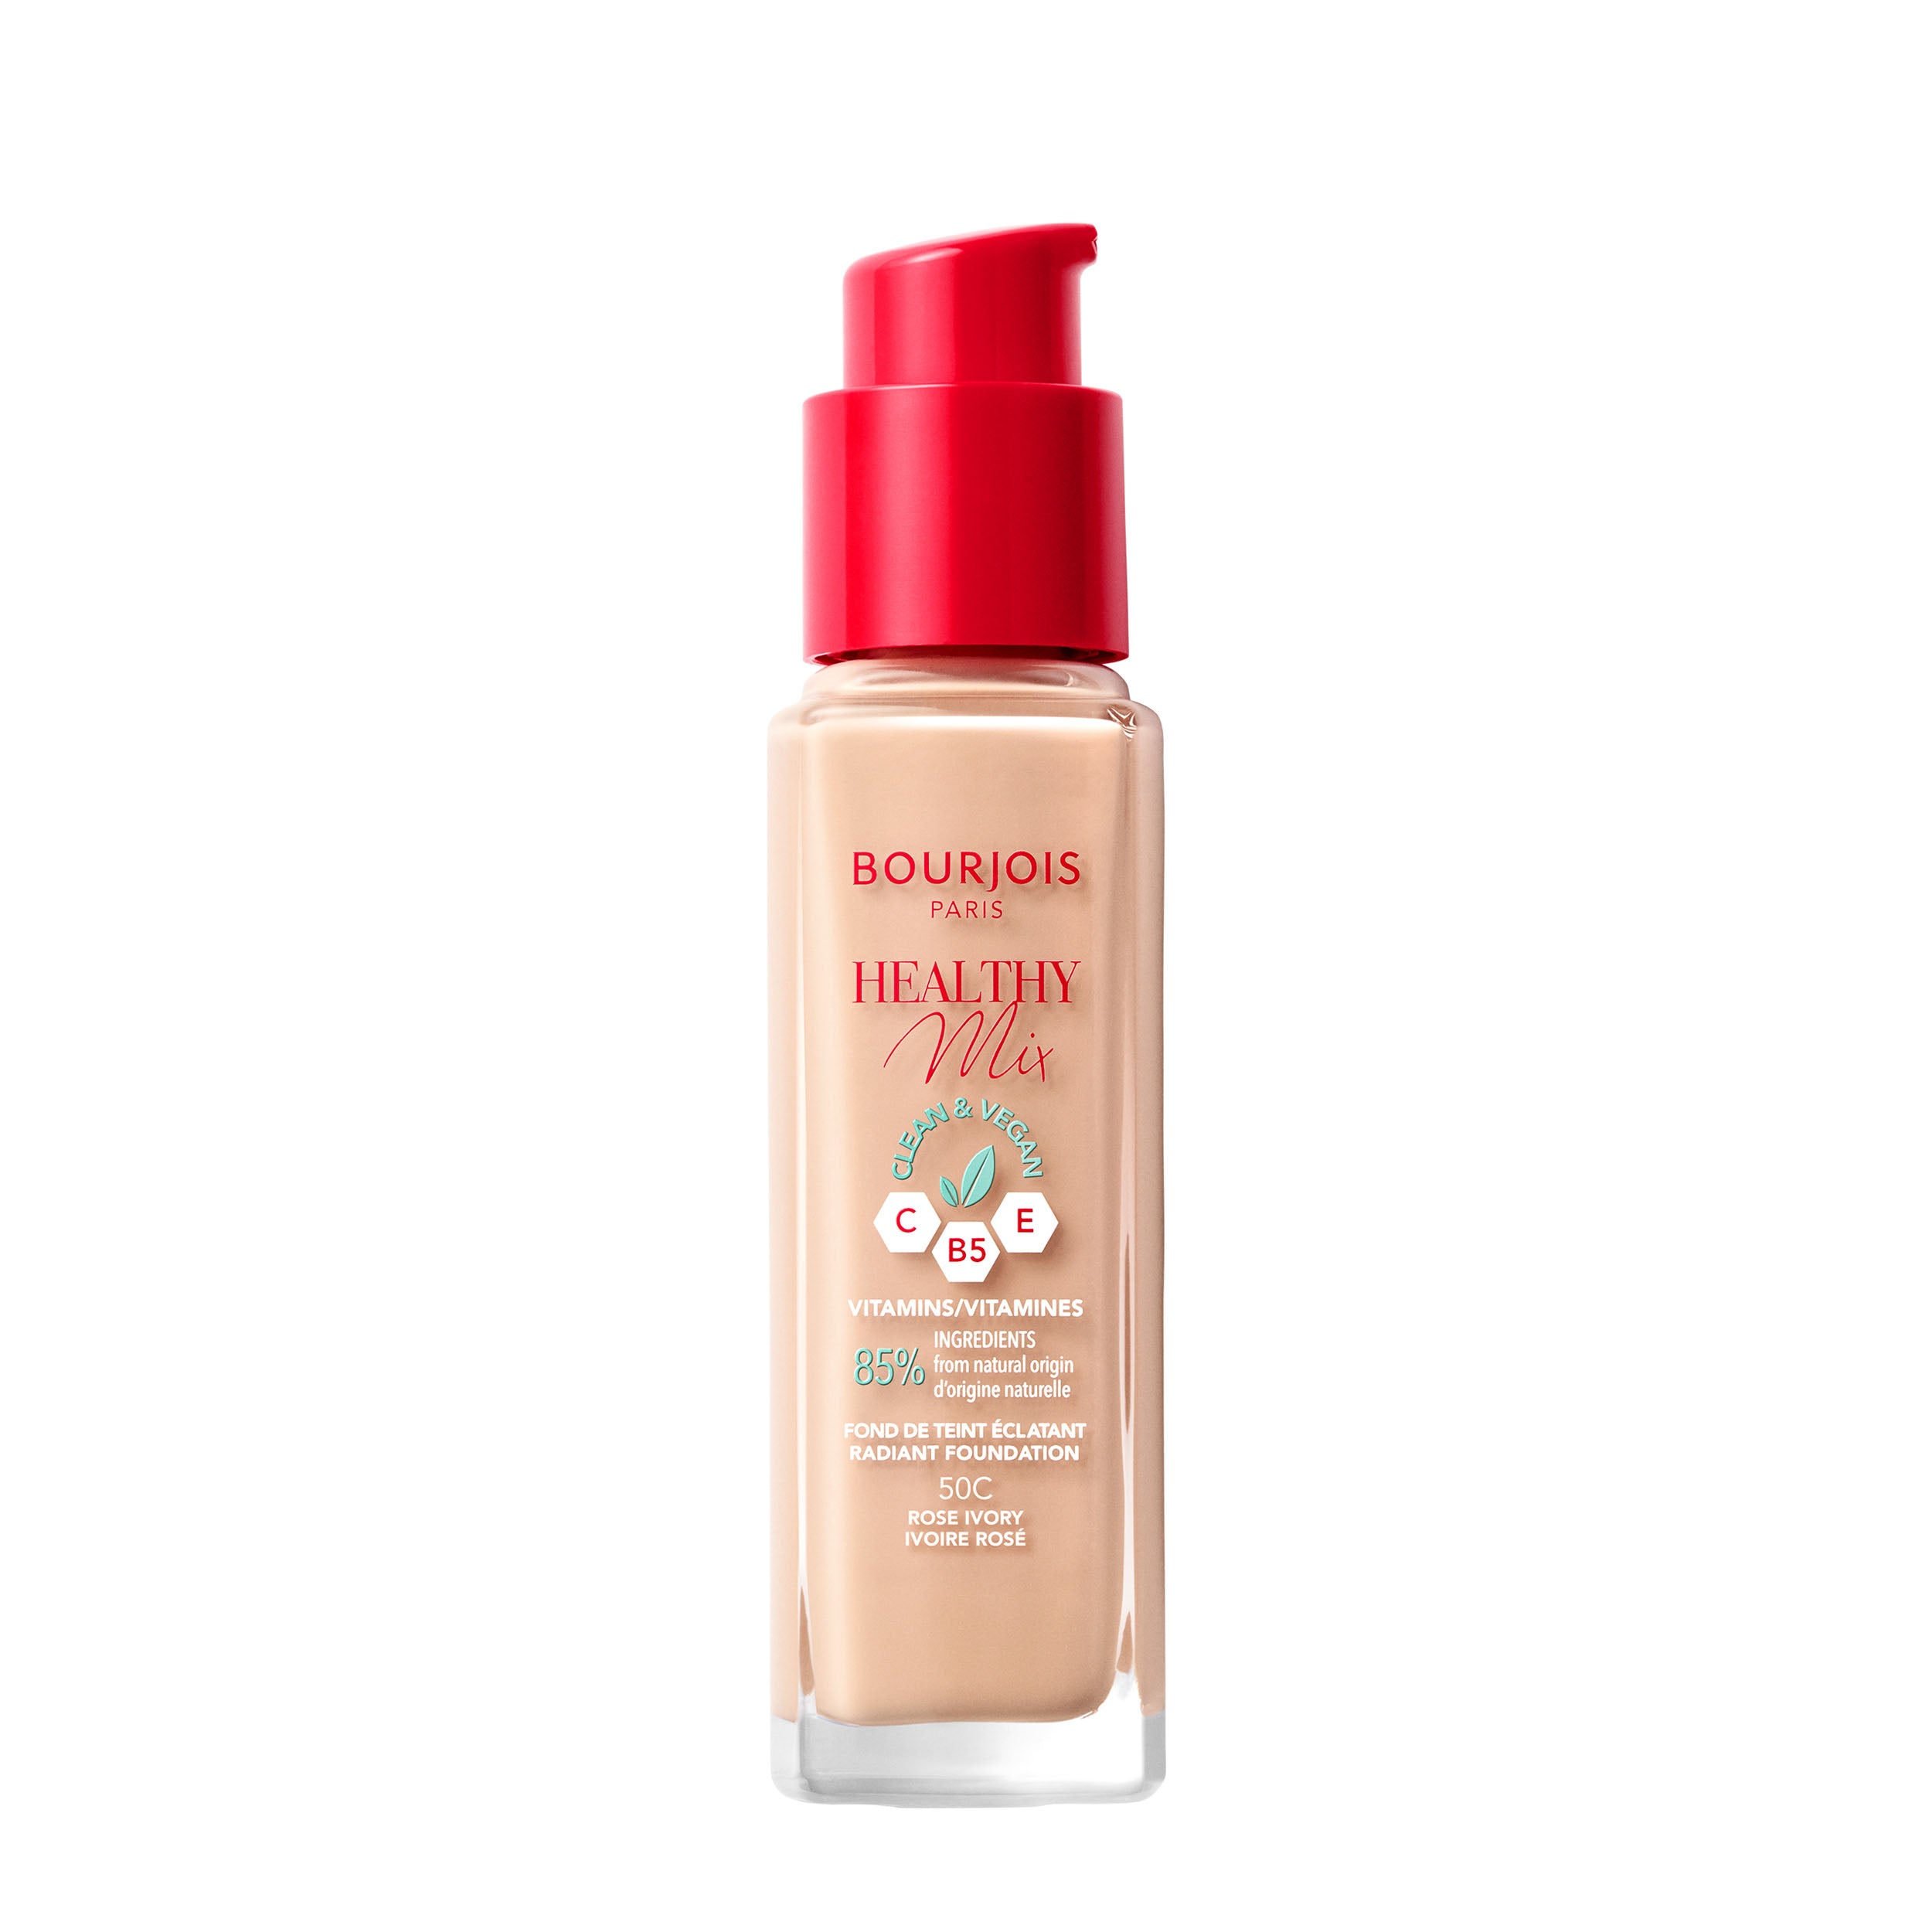 Healty mix clean foundation . 50C